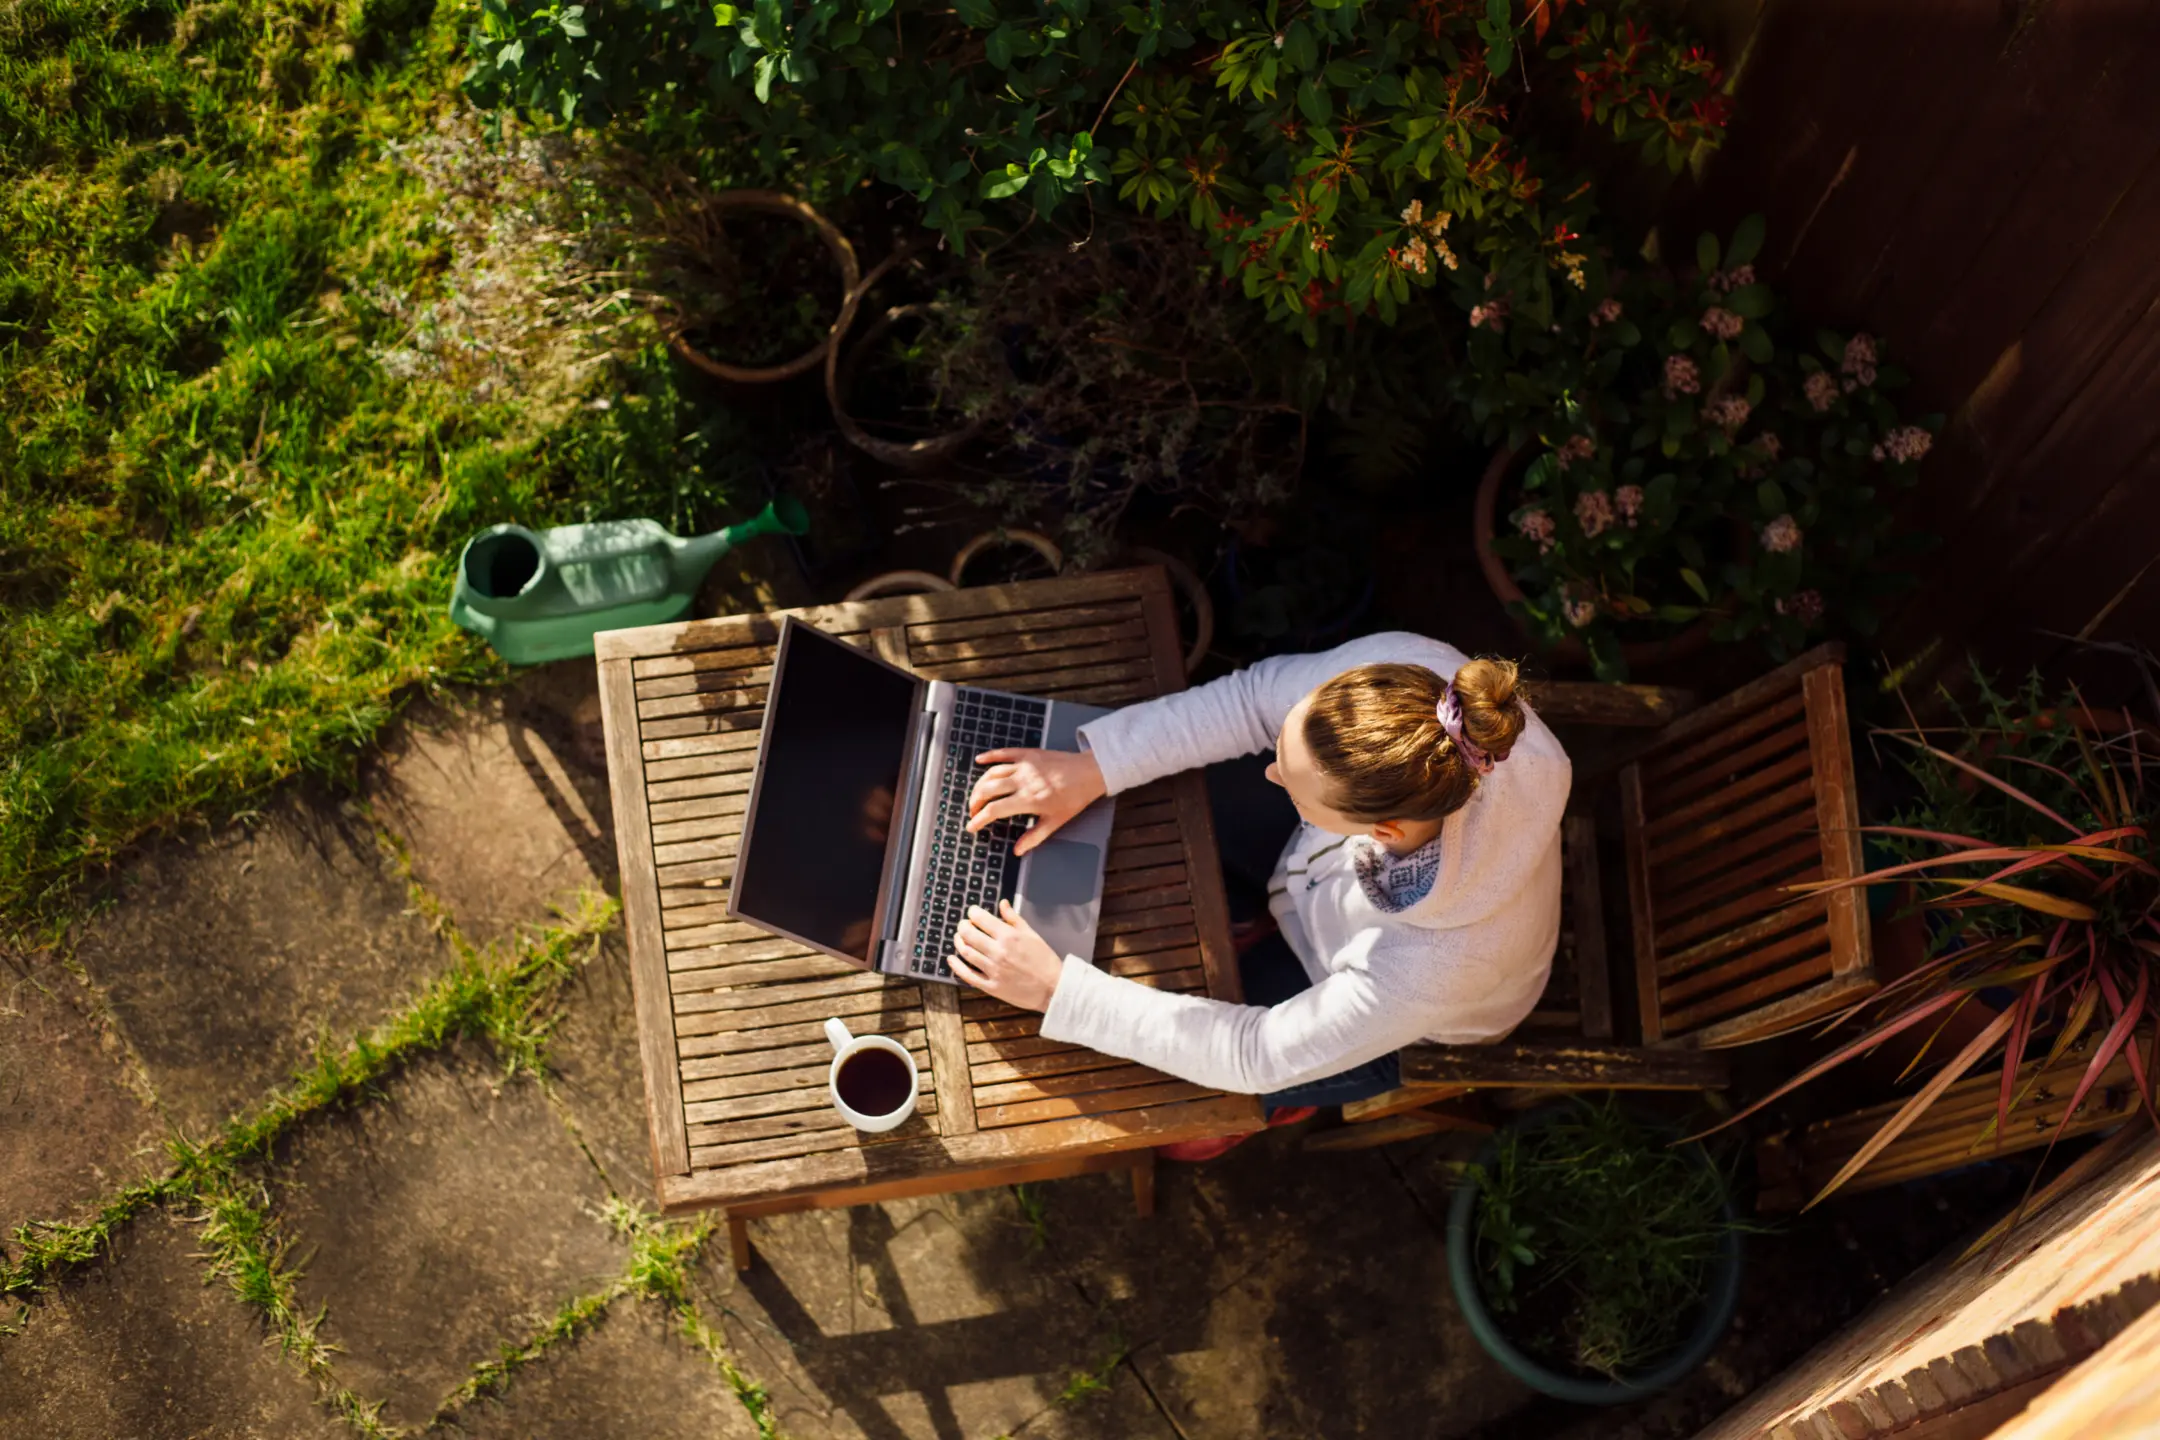 Is remote work right for you? Get the facts.